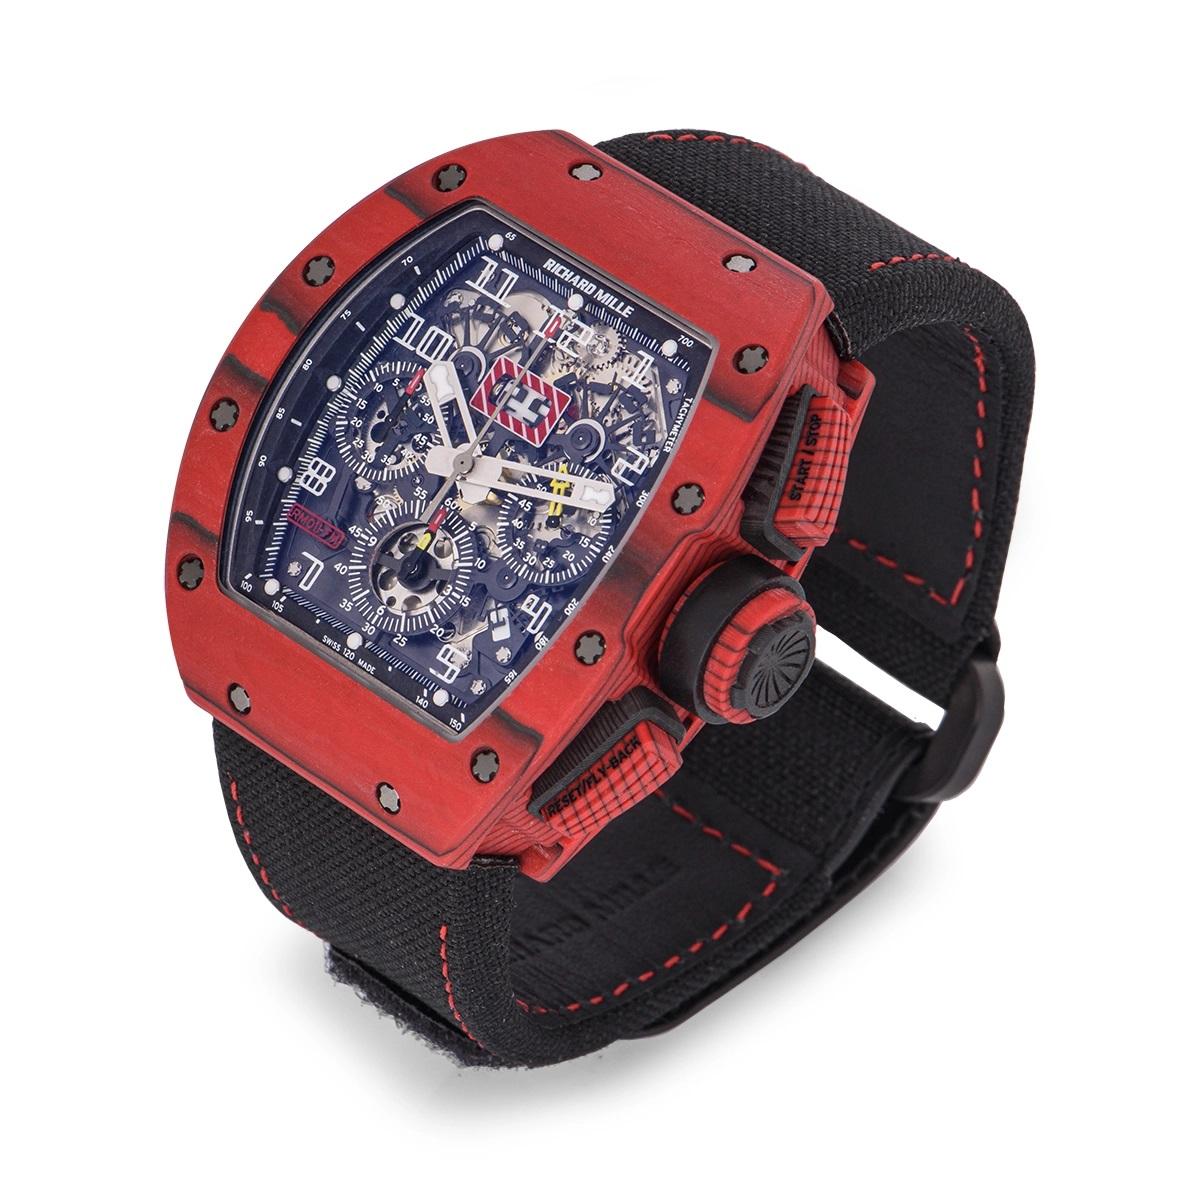 Inspired by Brazilian racing driver Felipe Massa, this 40mm Flyback Chronograph RM 011 model by Richard Mille is constructed from Red Quartz TPT (Thin Ply Technology) Carbon. Massa, known for his 15 year career in Formula One (F1) was the first